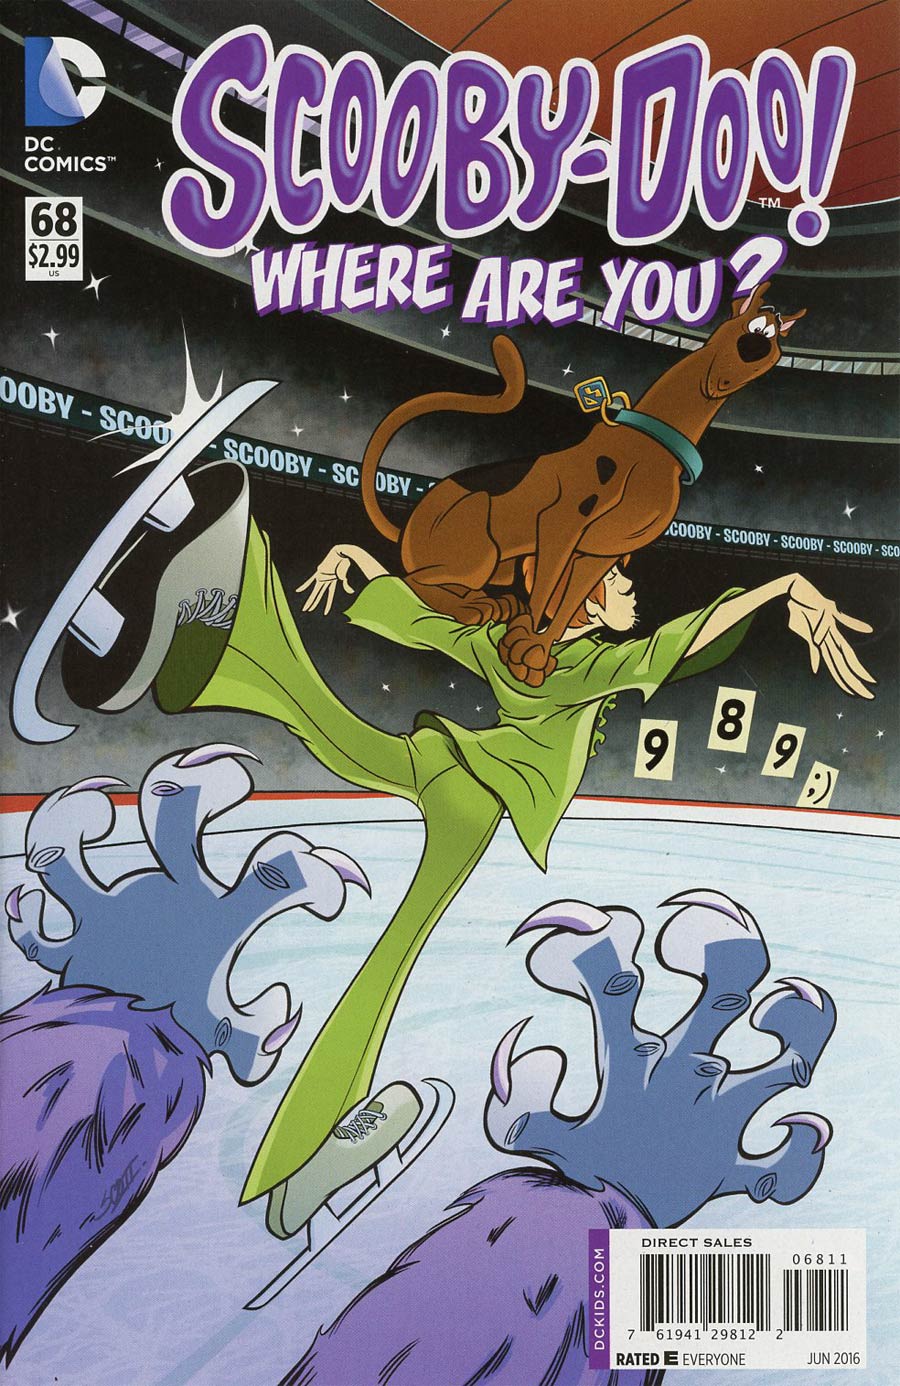 Scooby-Doo Where Are You #68